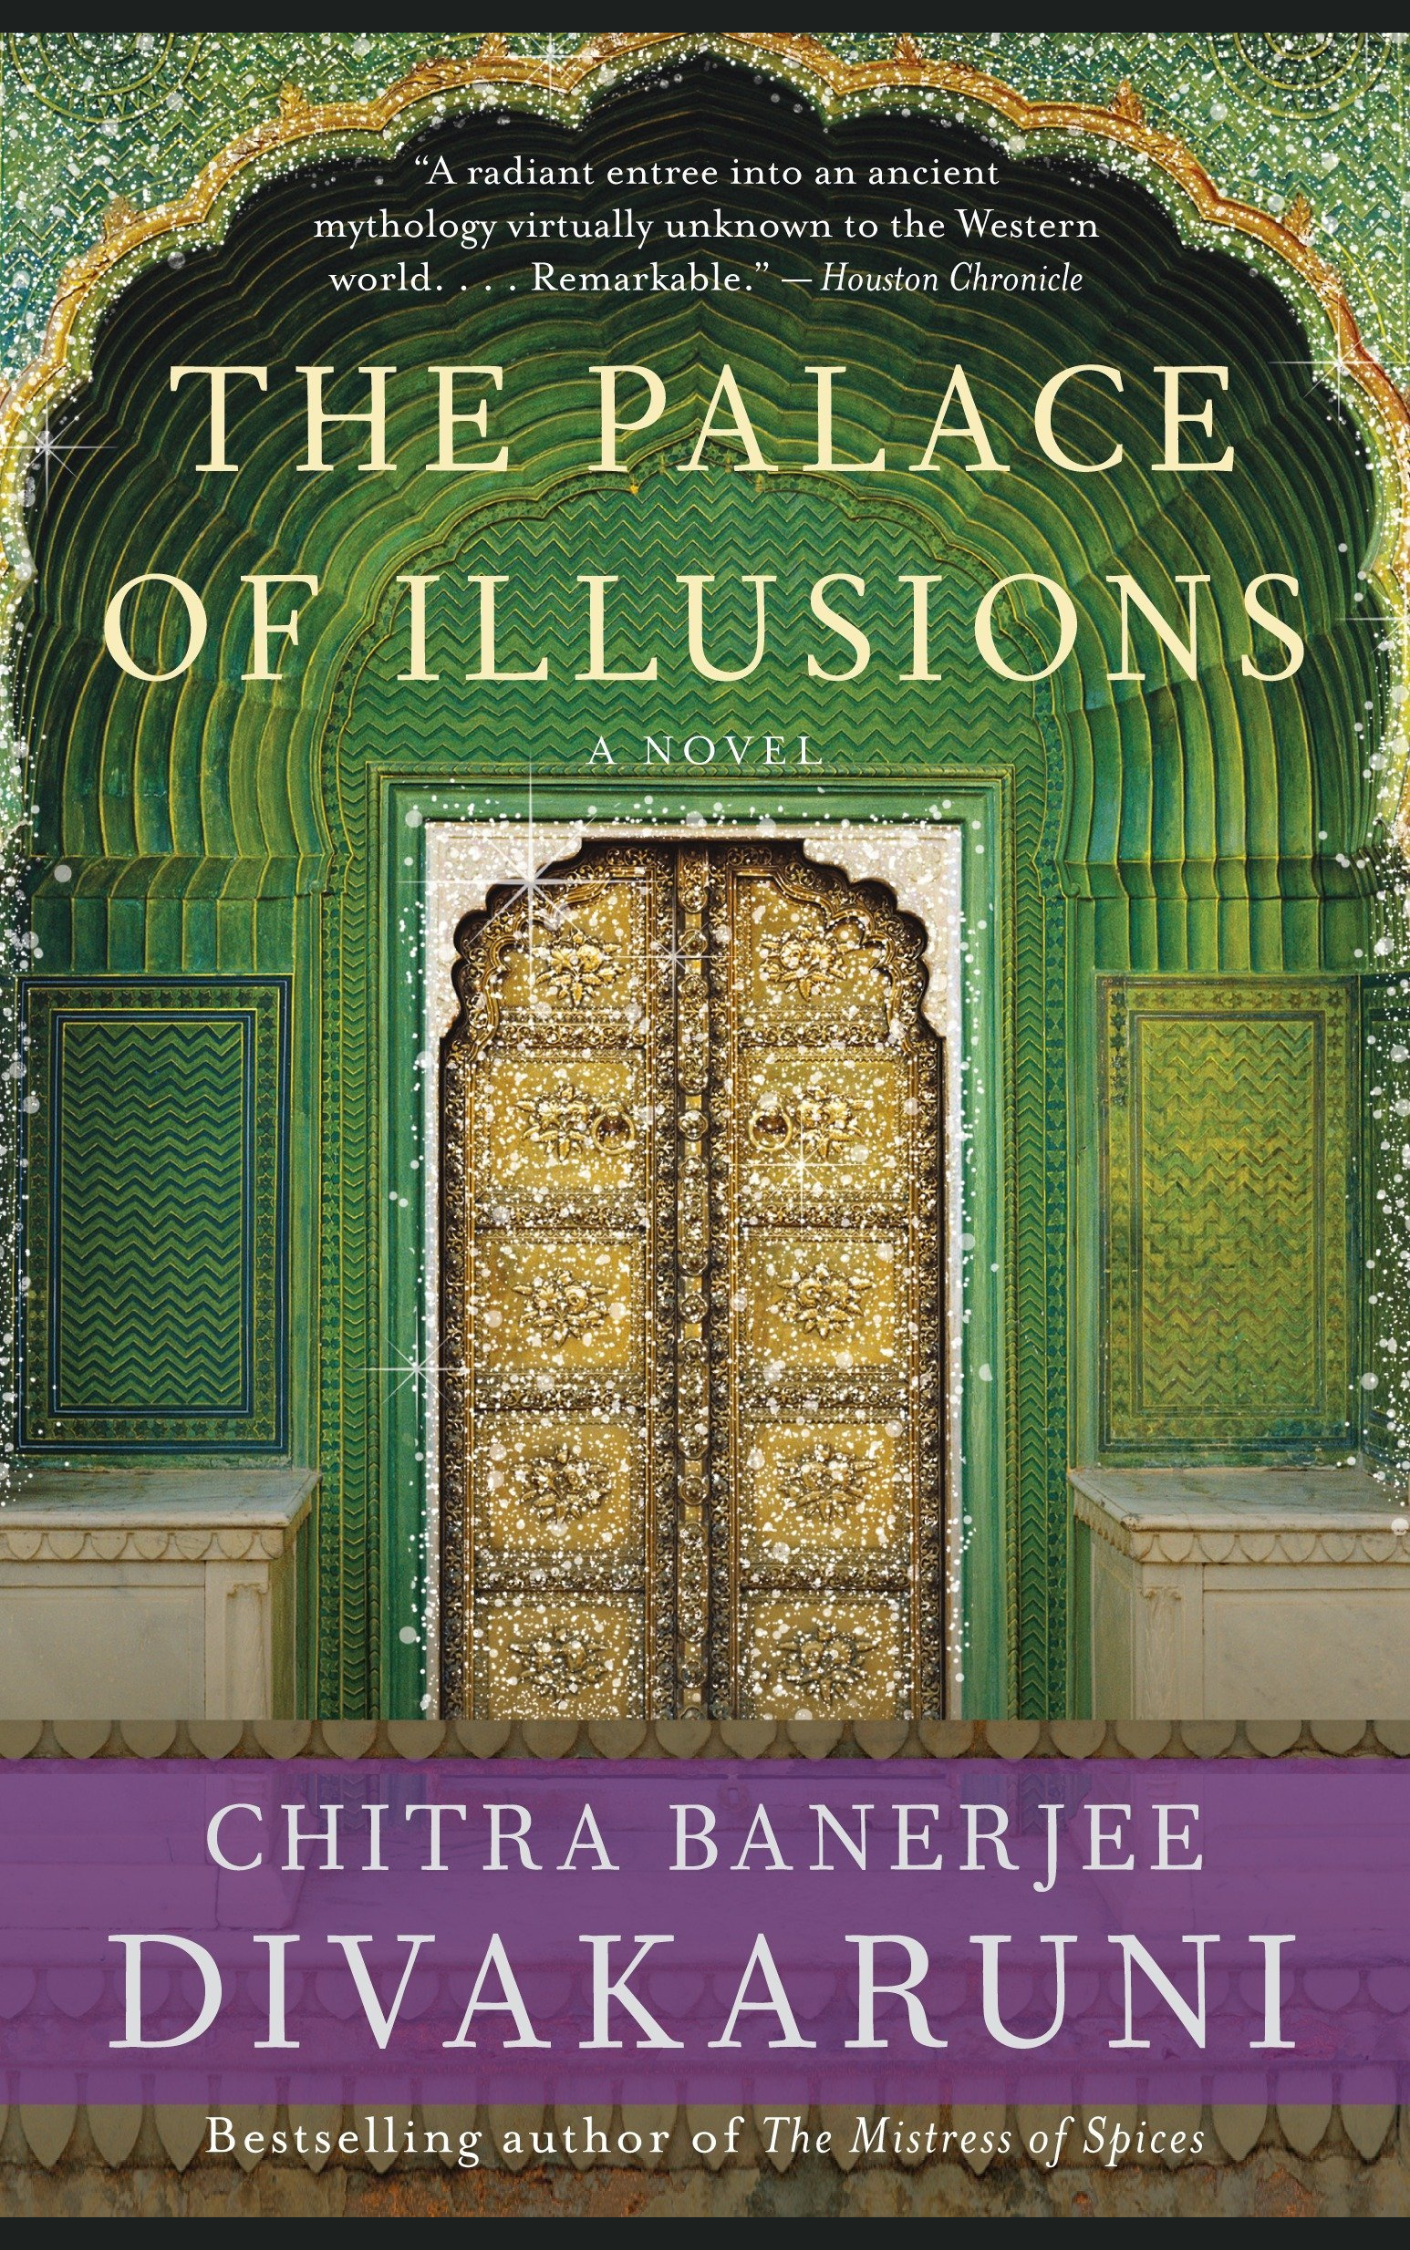 THE PALACE OF ILLUSIONS by CHITRA BANERJEE DIVAKARUNI